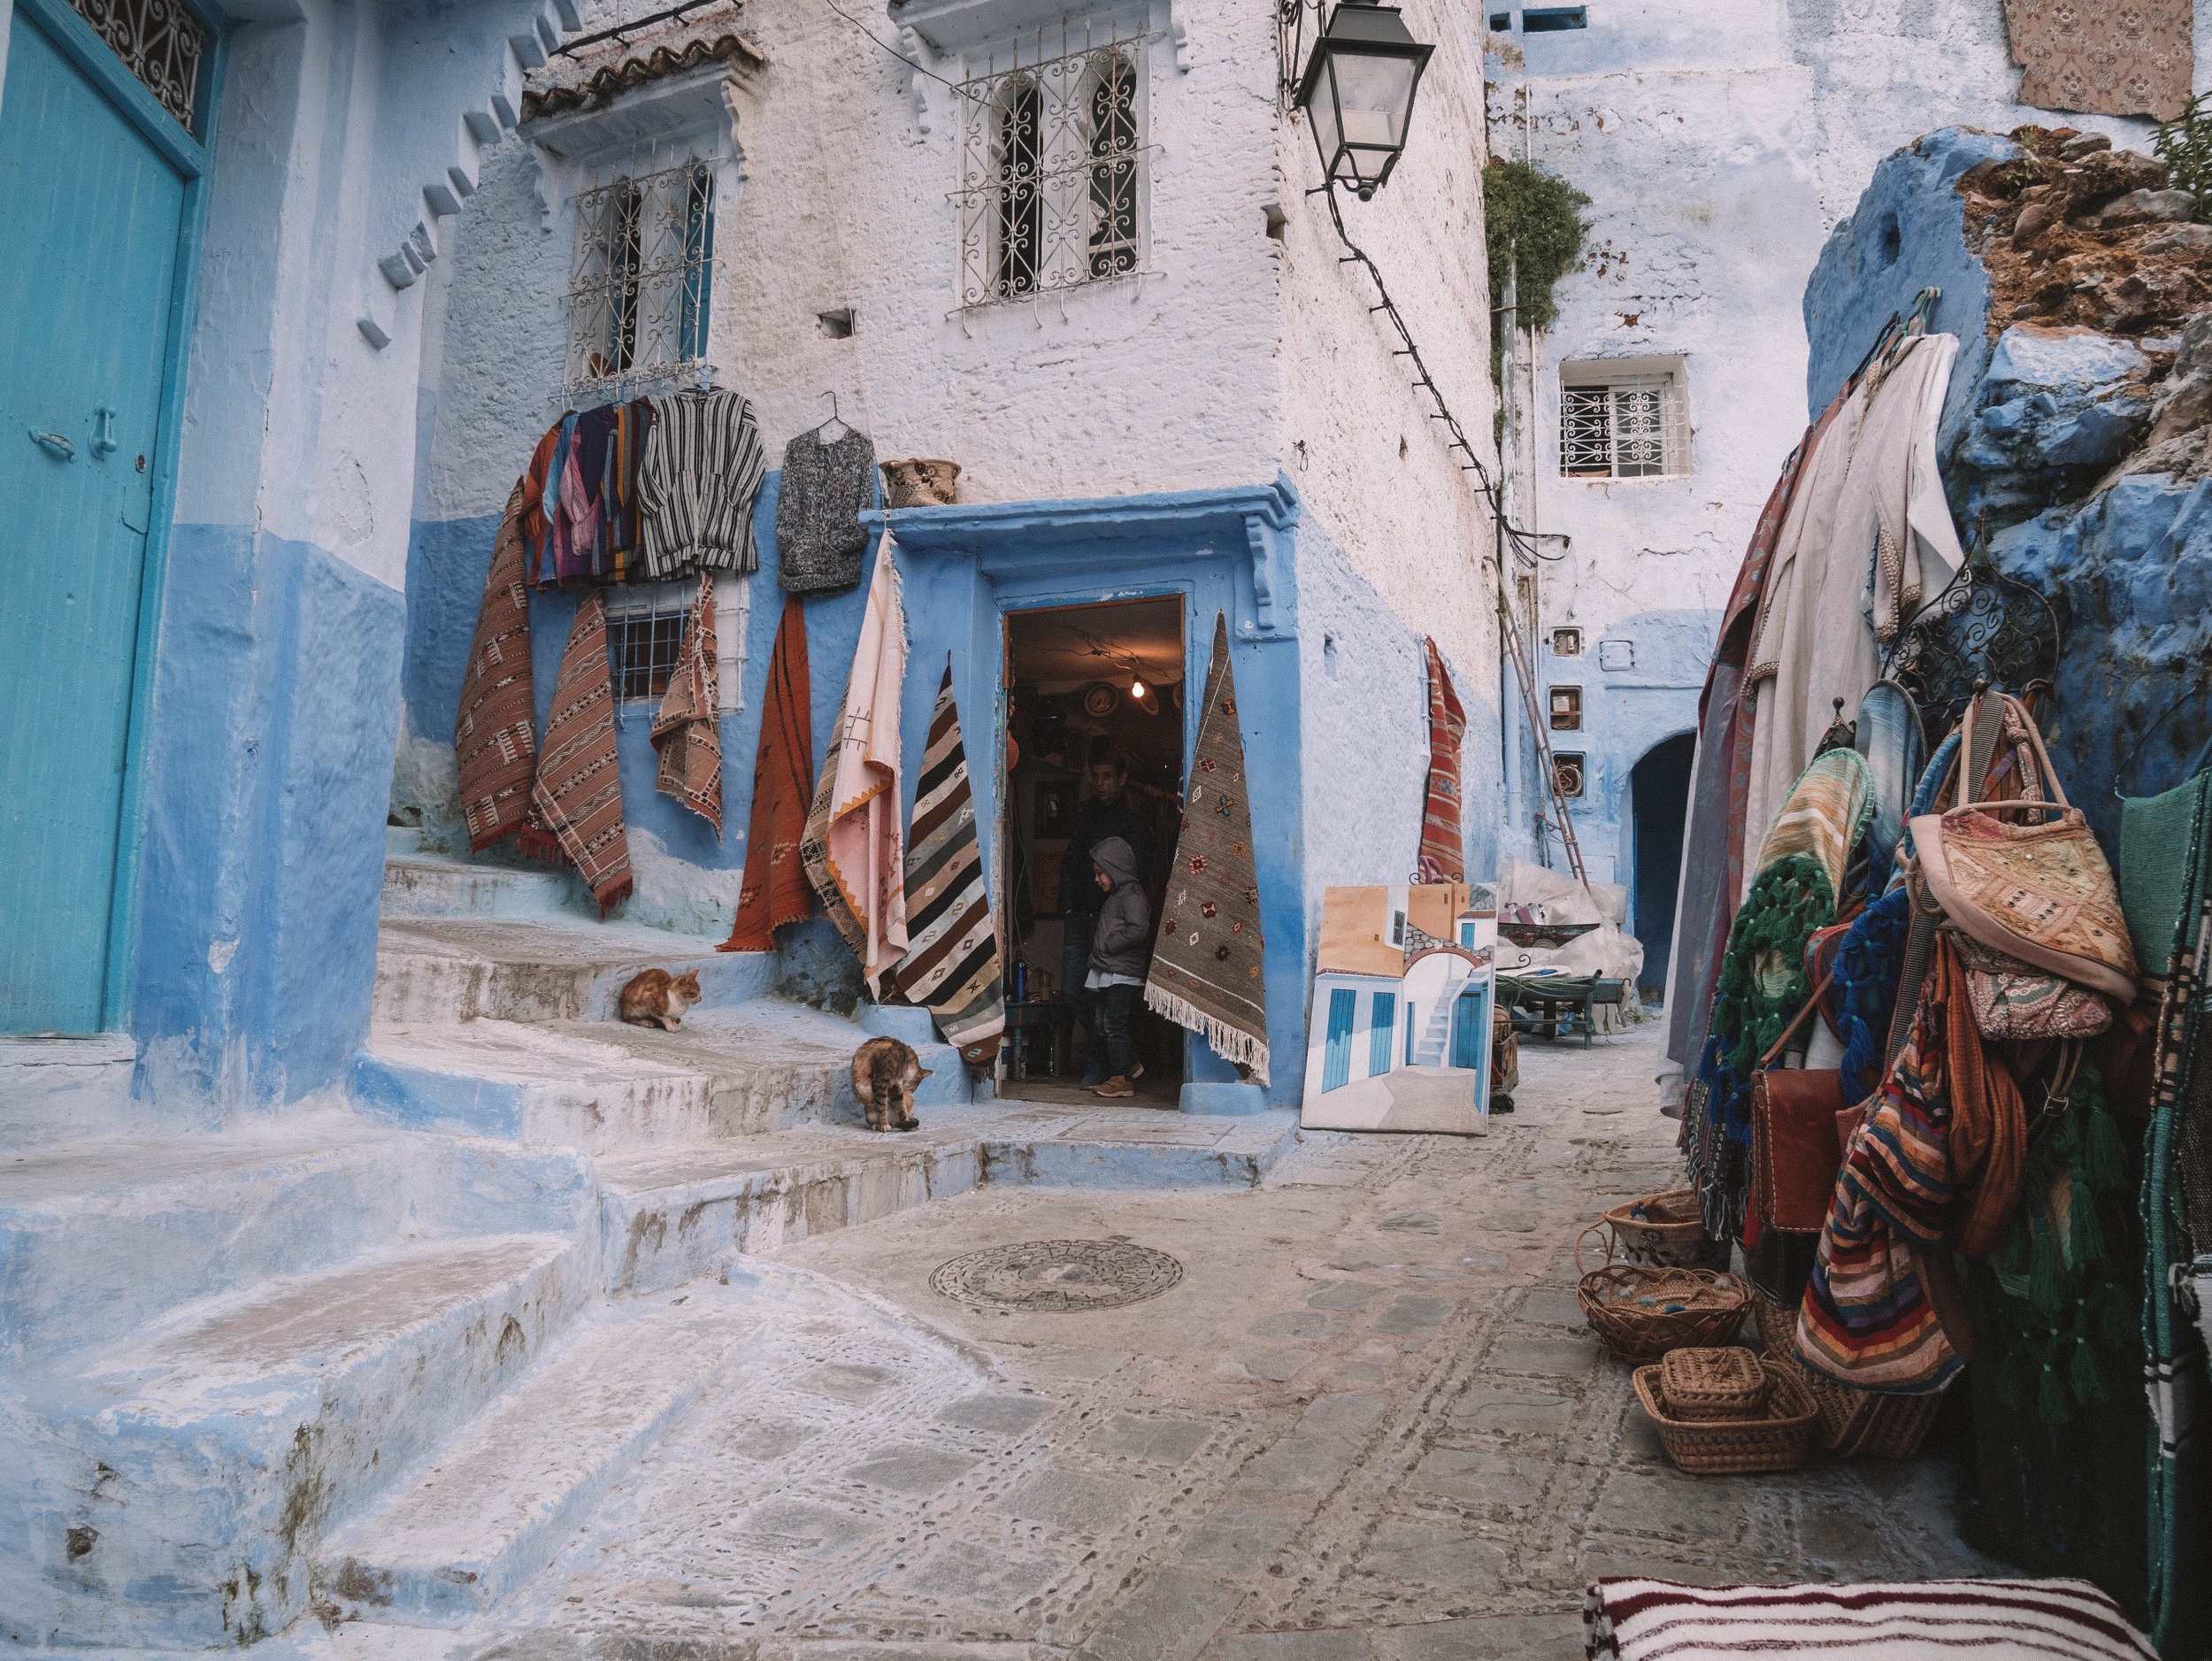 Lots of little treasures to buy - Chefchaouen - Morocco